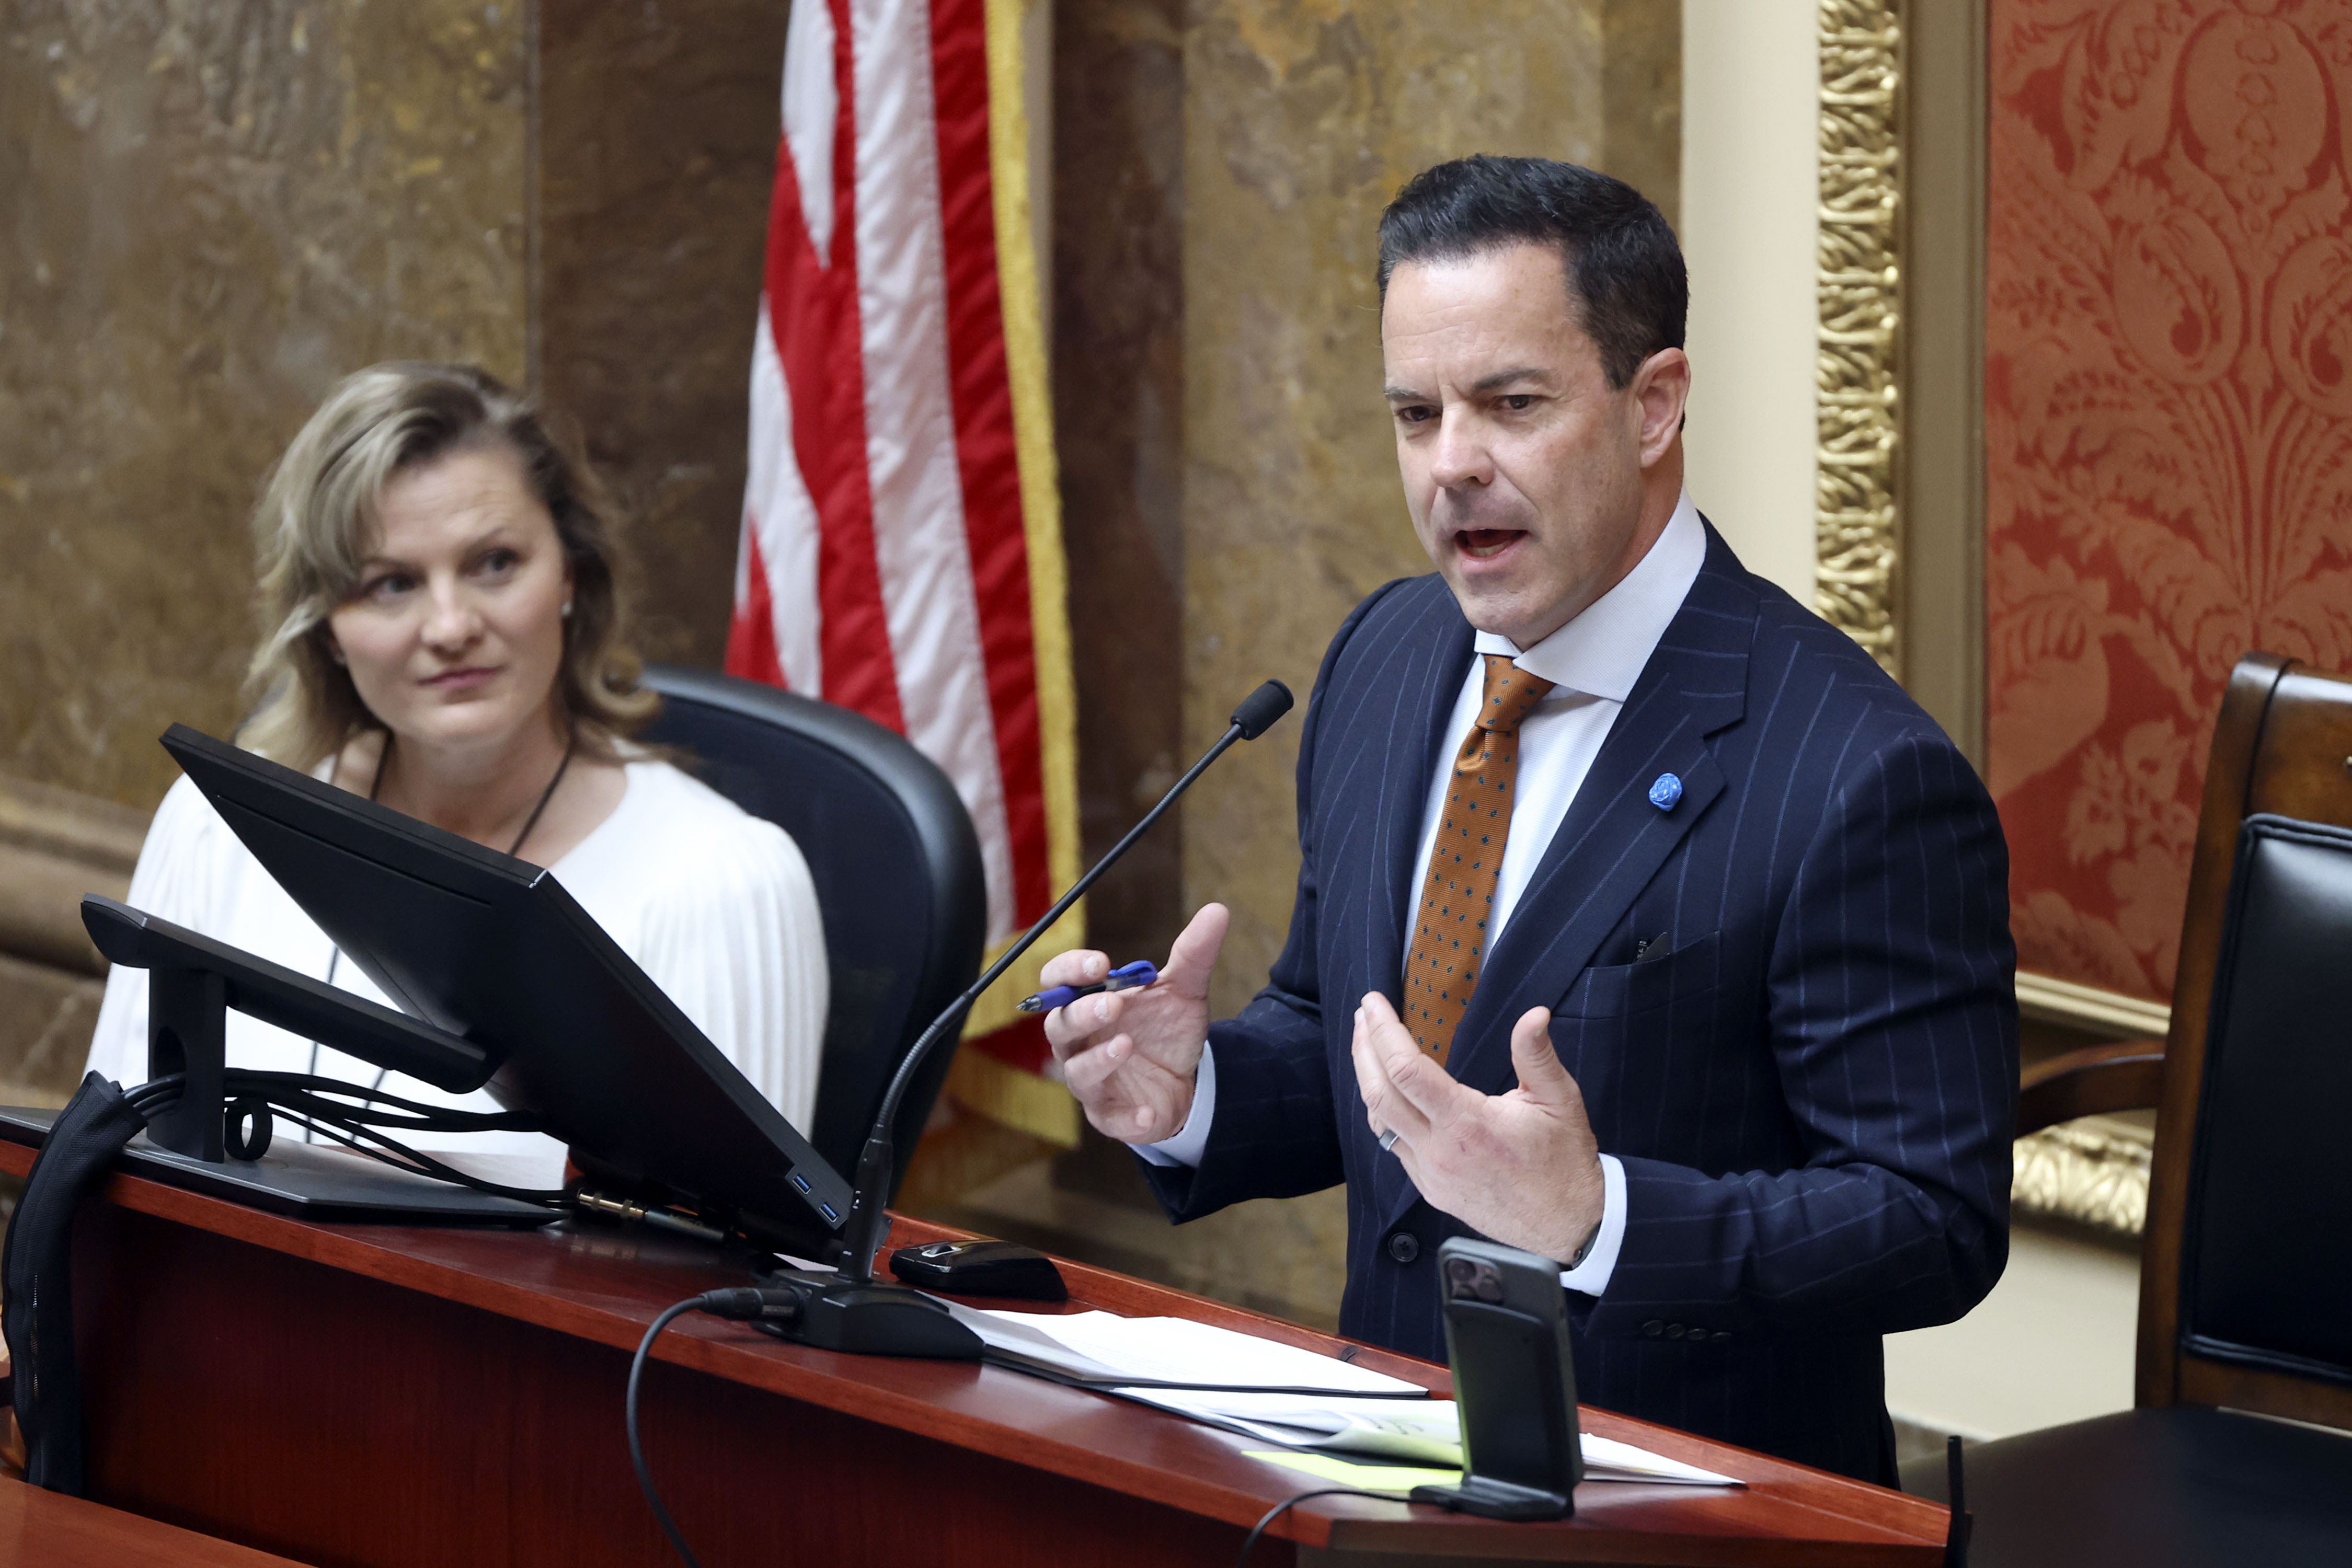 House Speaker Brad Wilson, R-Kaysville, gives his opening remarks during the first day of the legislative session at the Capitol in Salt Lake City on Tuesday, Jan. 18, 2022.